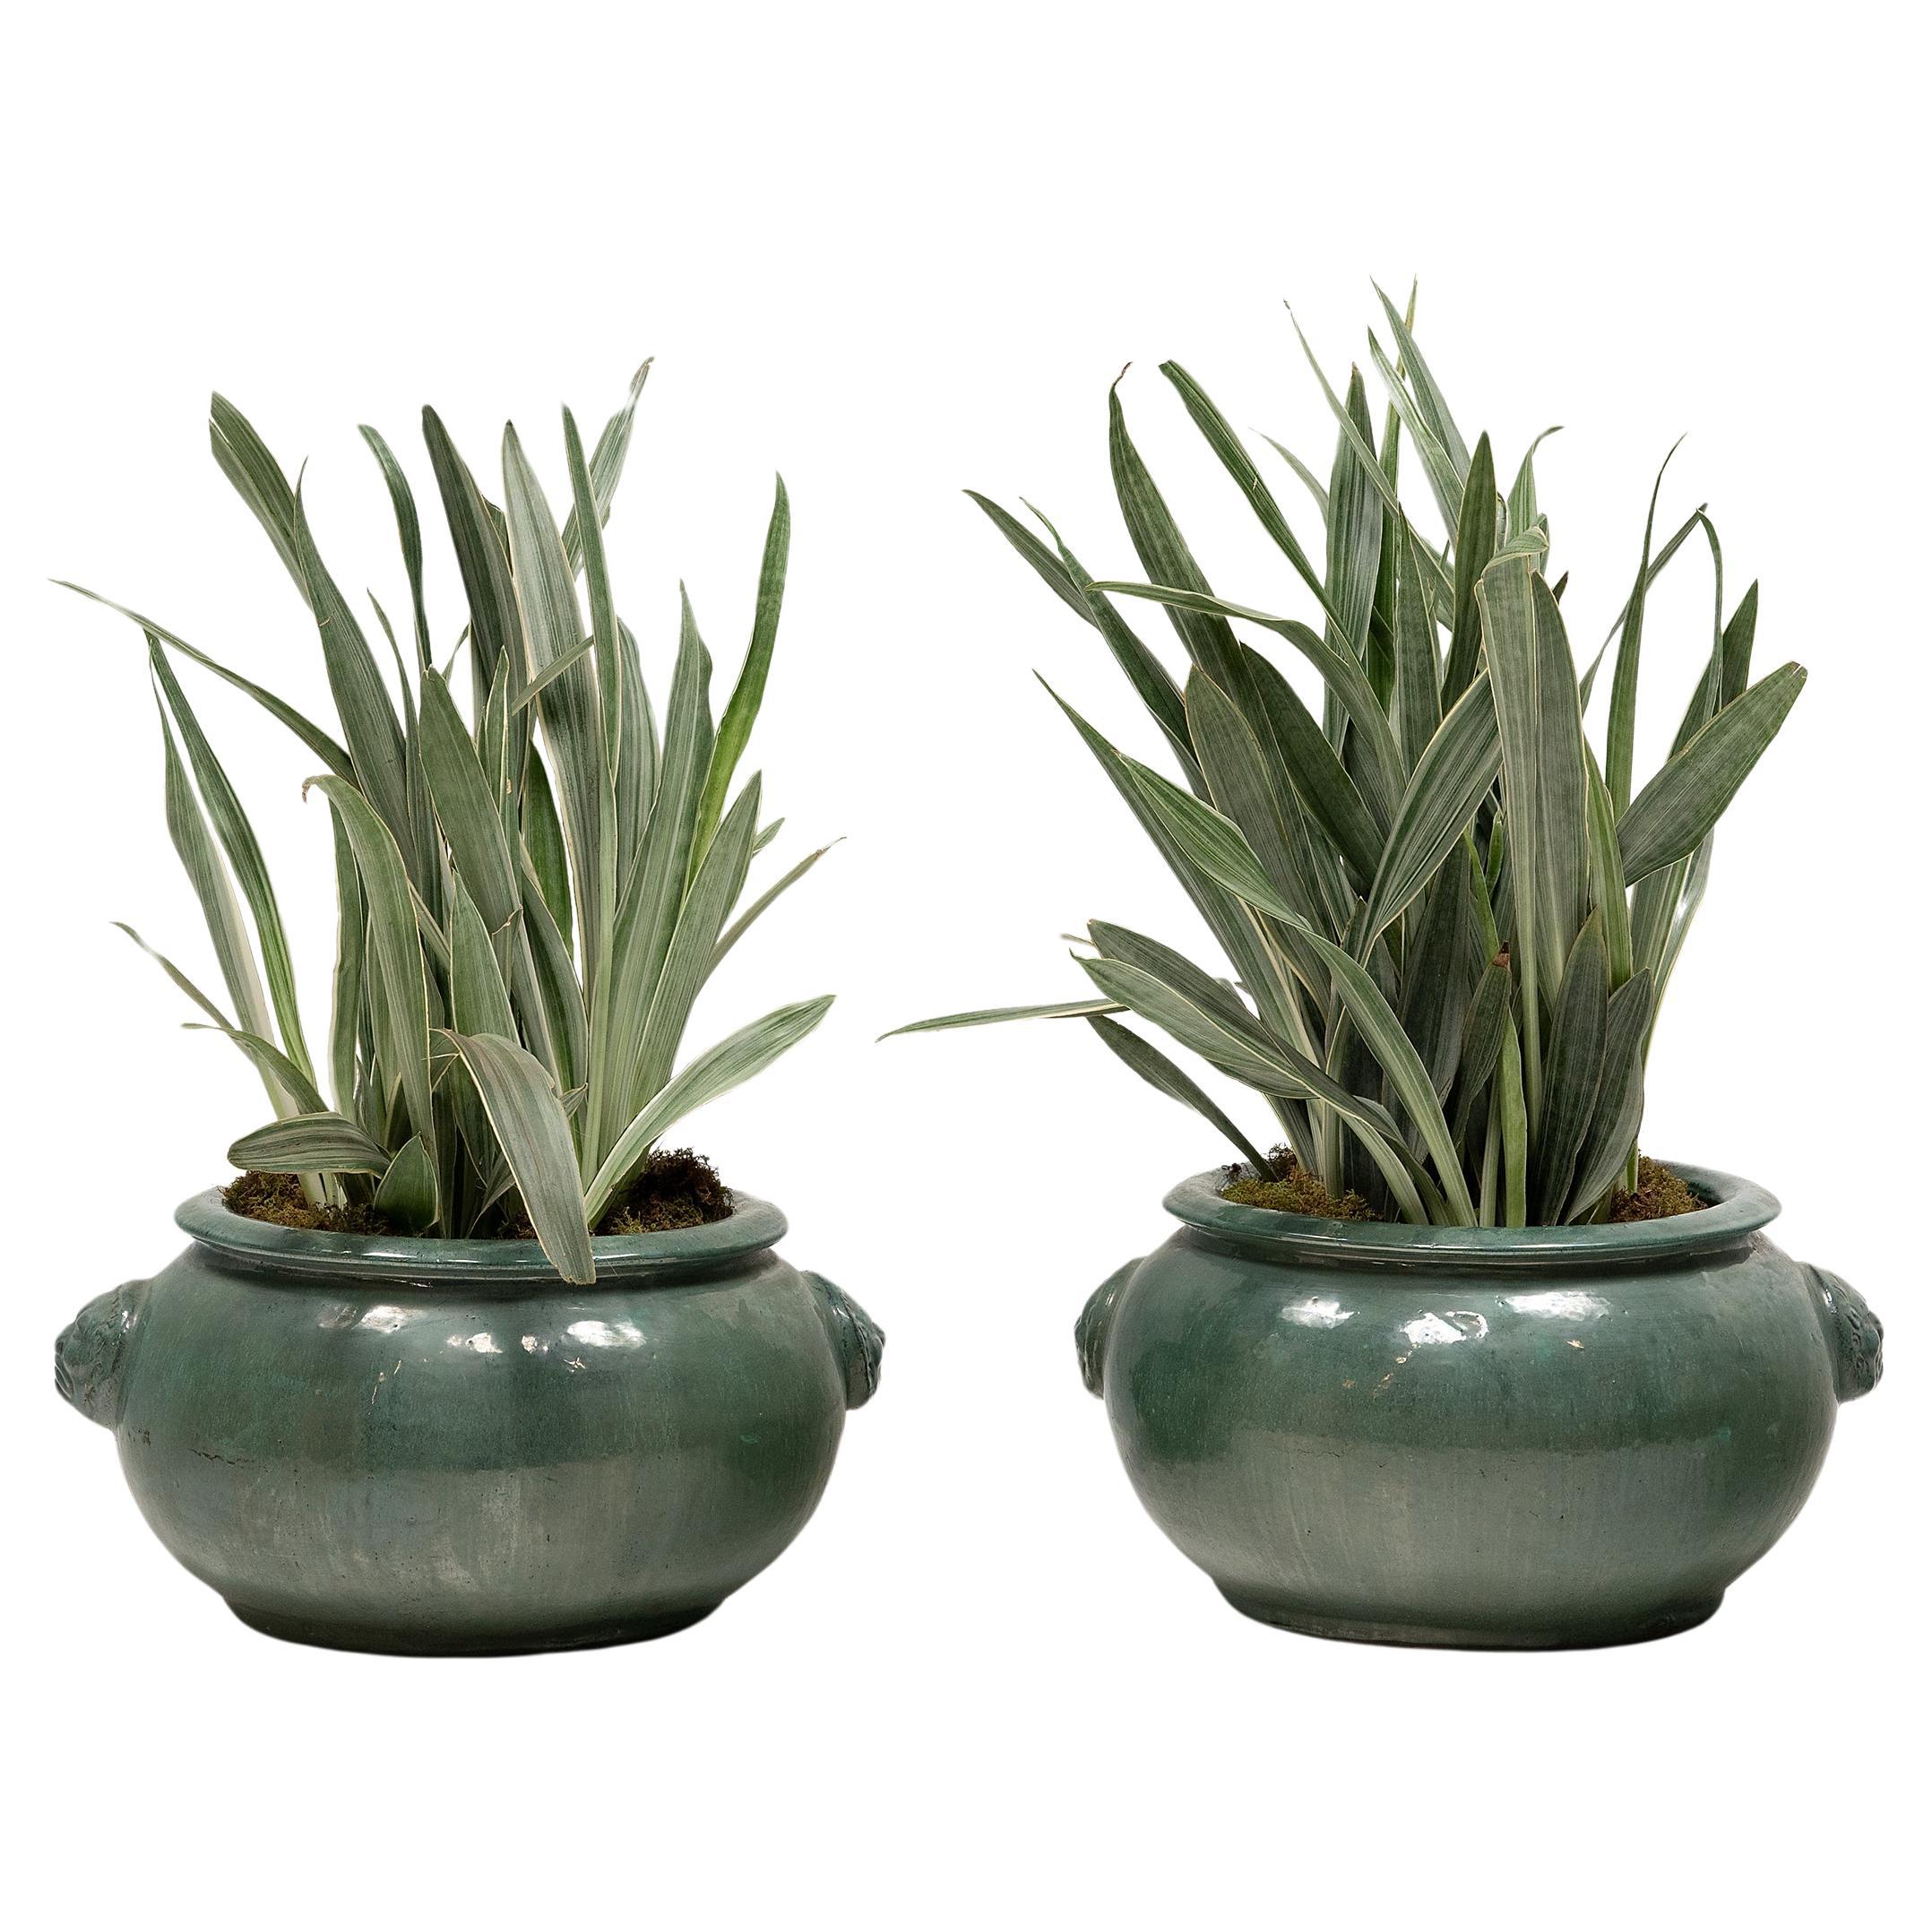 Pair of Green Glazed Chinese Planters